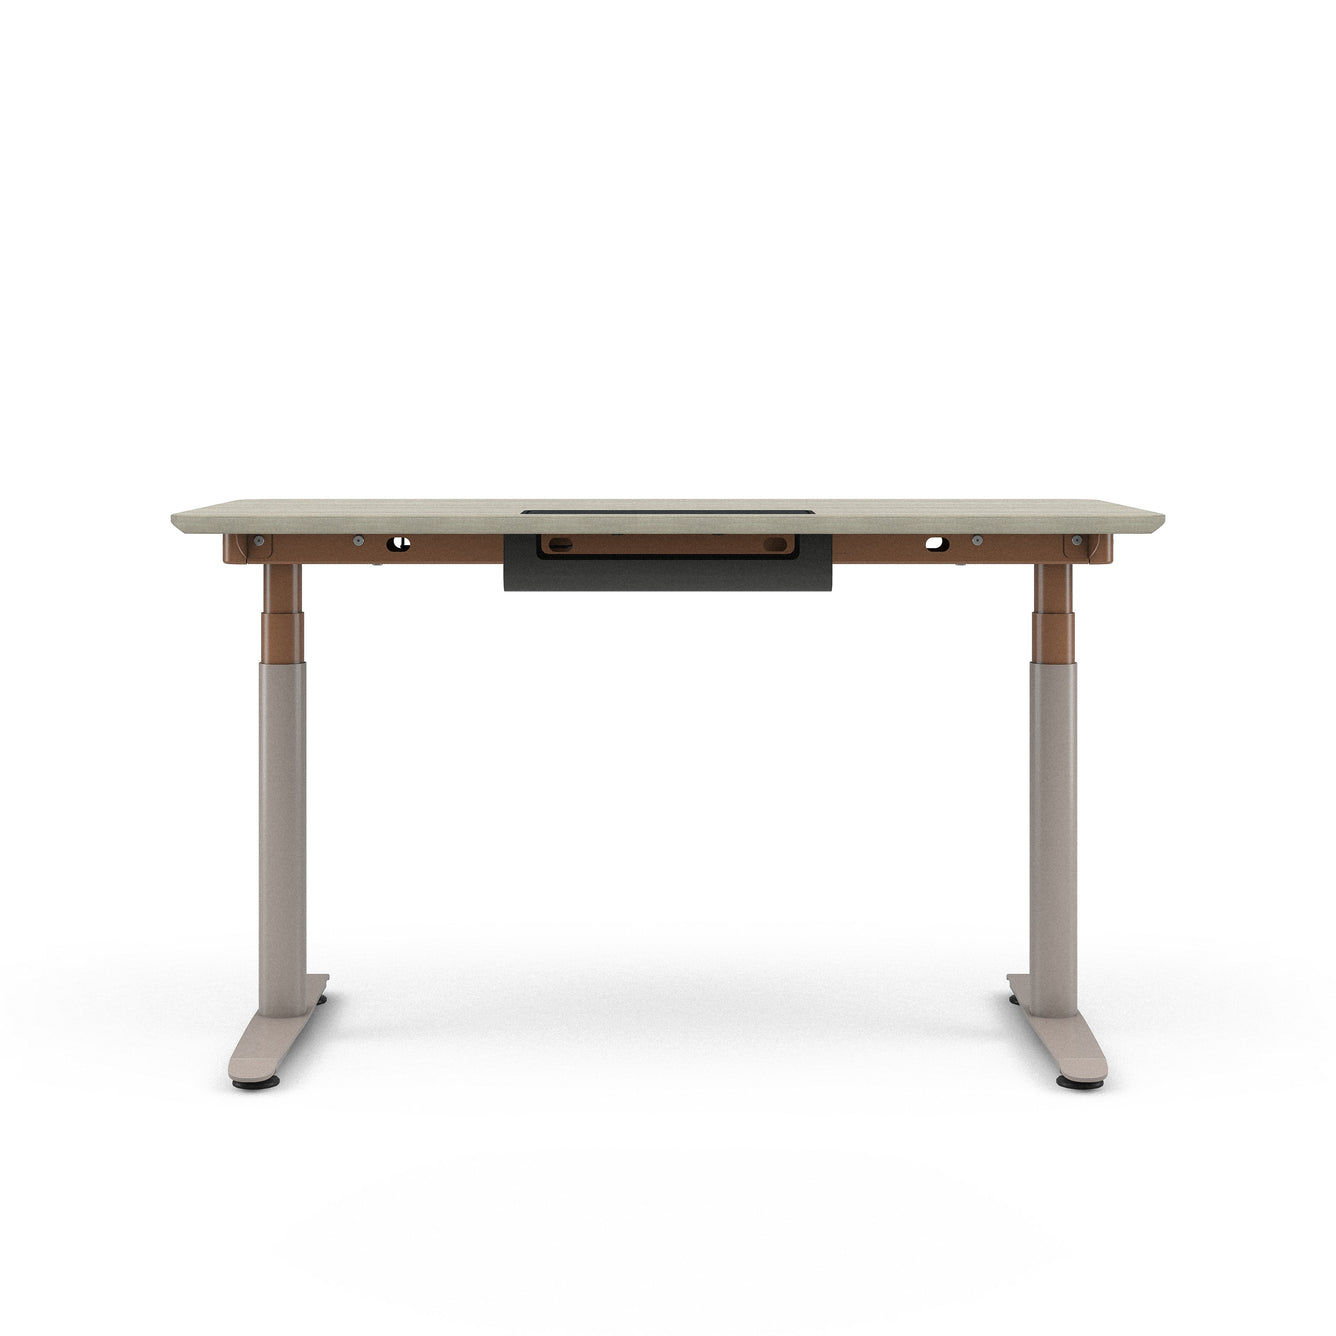 Grey Oak Top with Chamfered Edge; Matte Copper + Nickel Base